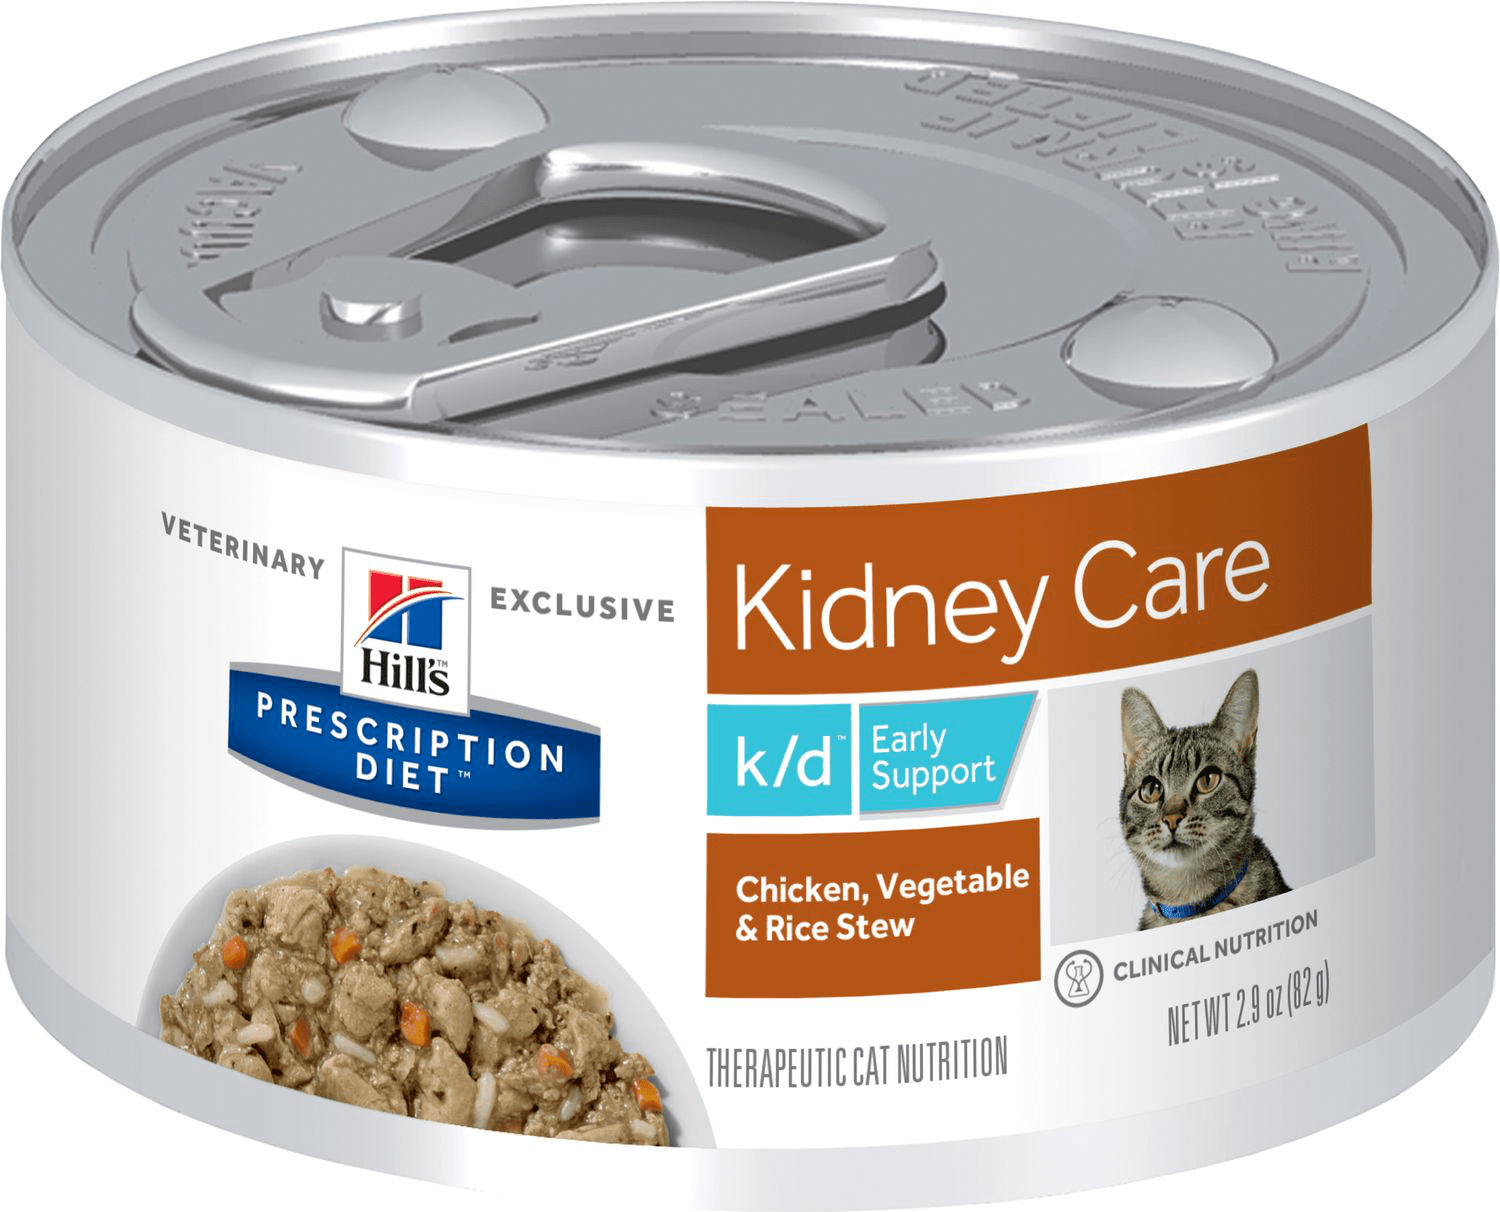 Hill's Prescription Diet K-d Early Support Chicken, Vegetable & Rice Stew